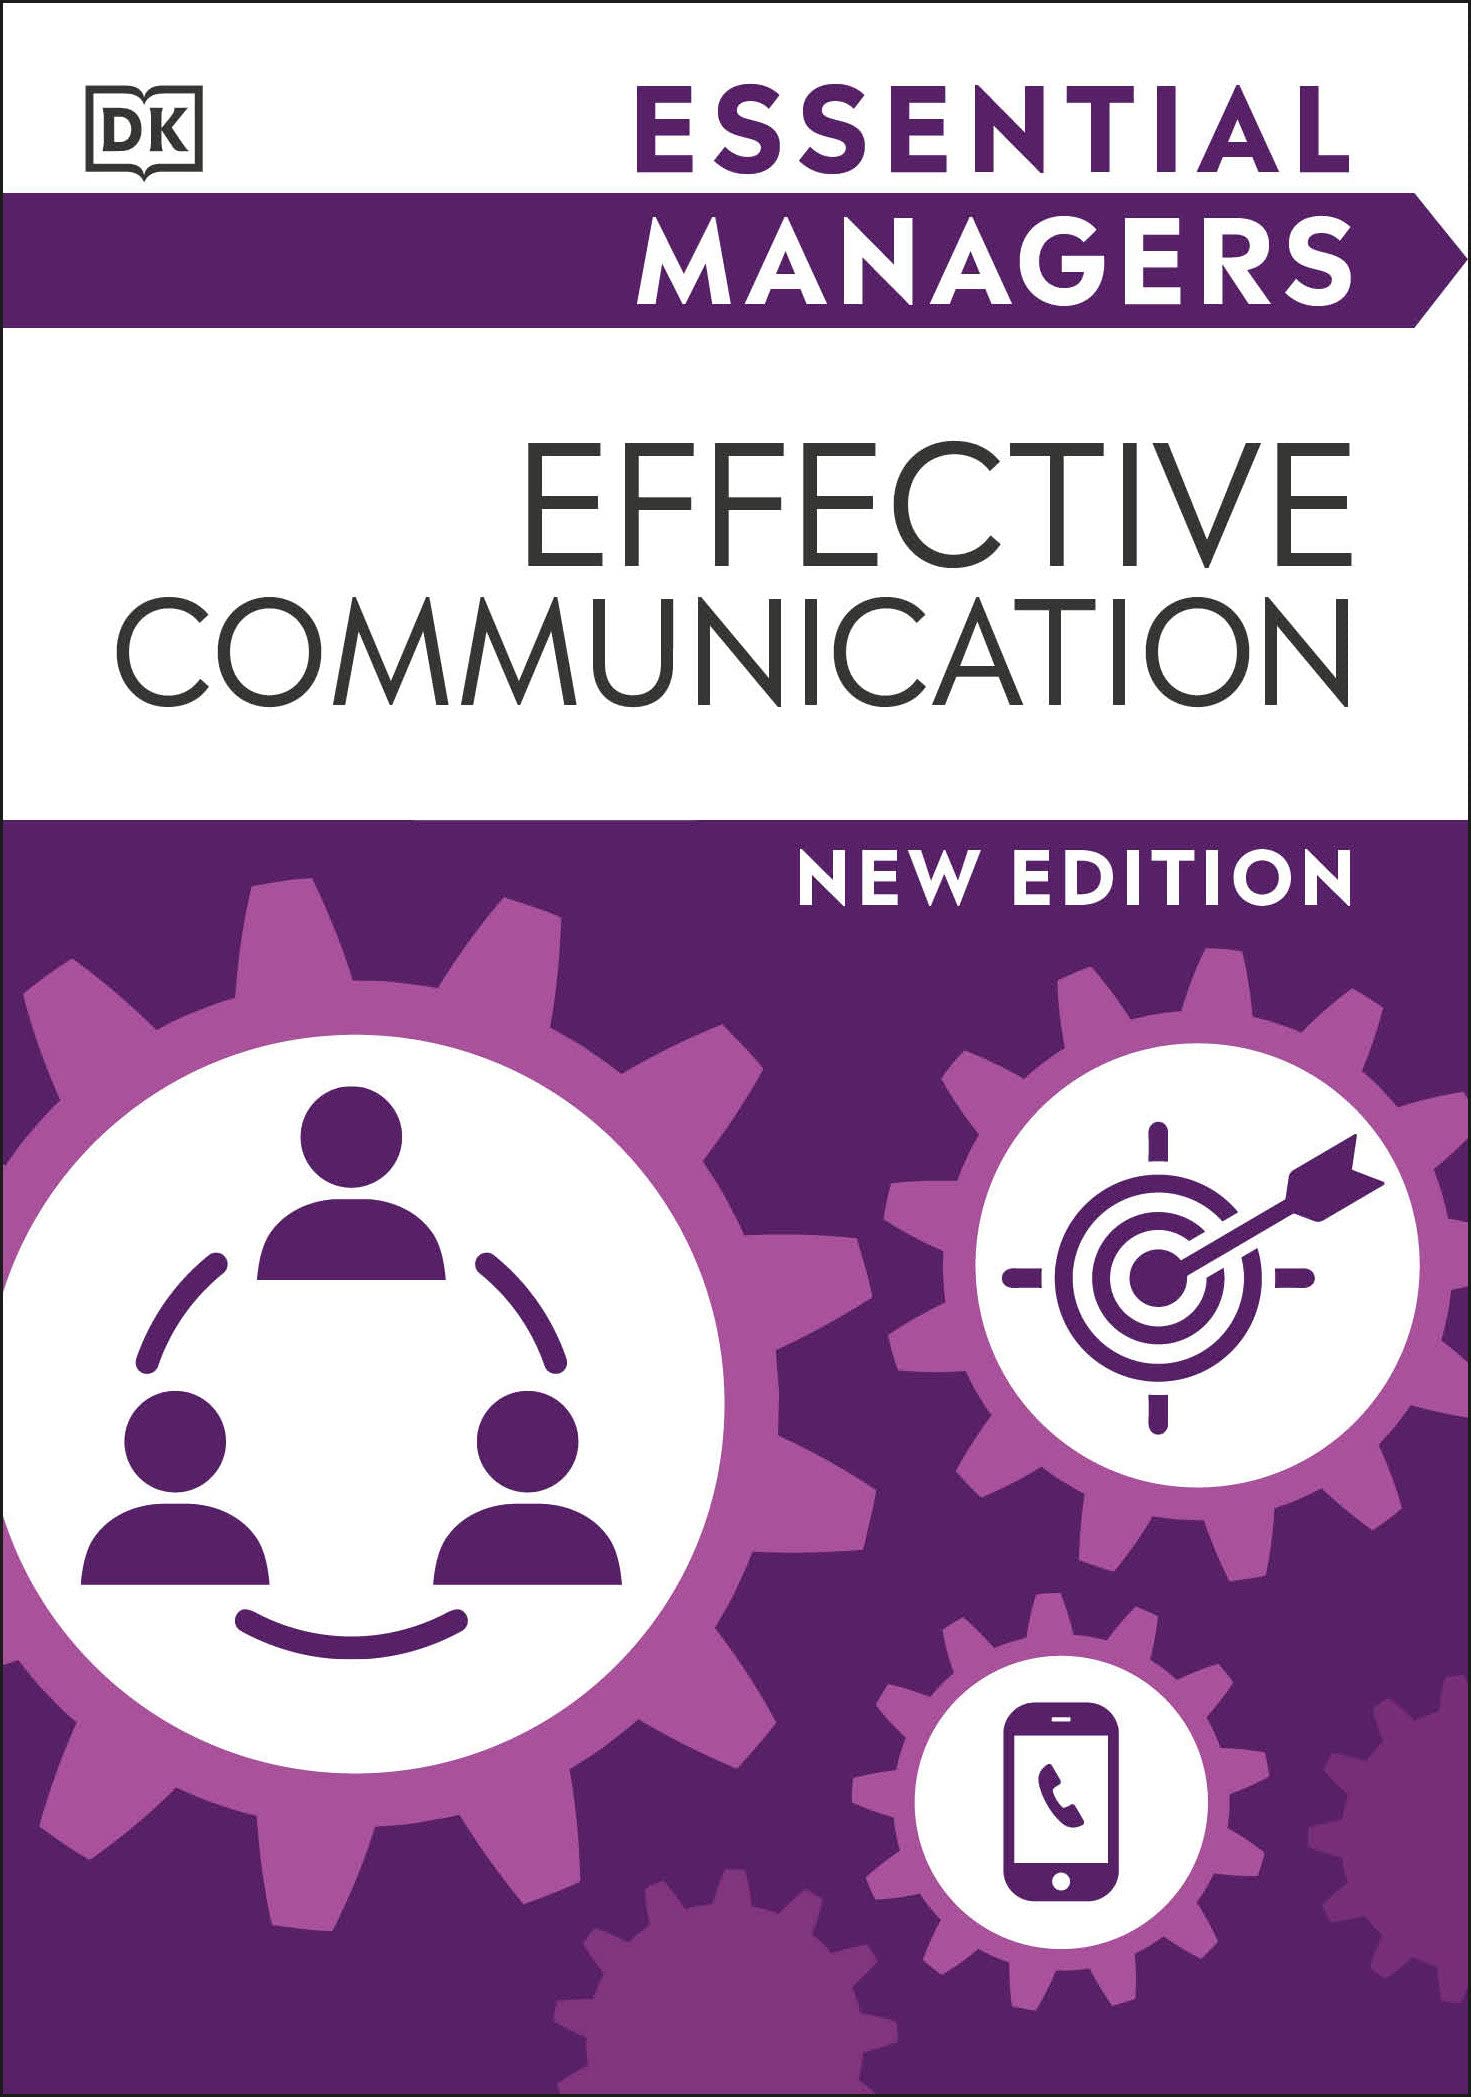 Essential Managers Effective Communication ( DK Essential Managers ) - SureShot Books Publishing LLC